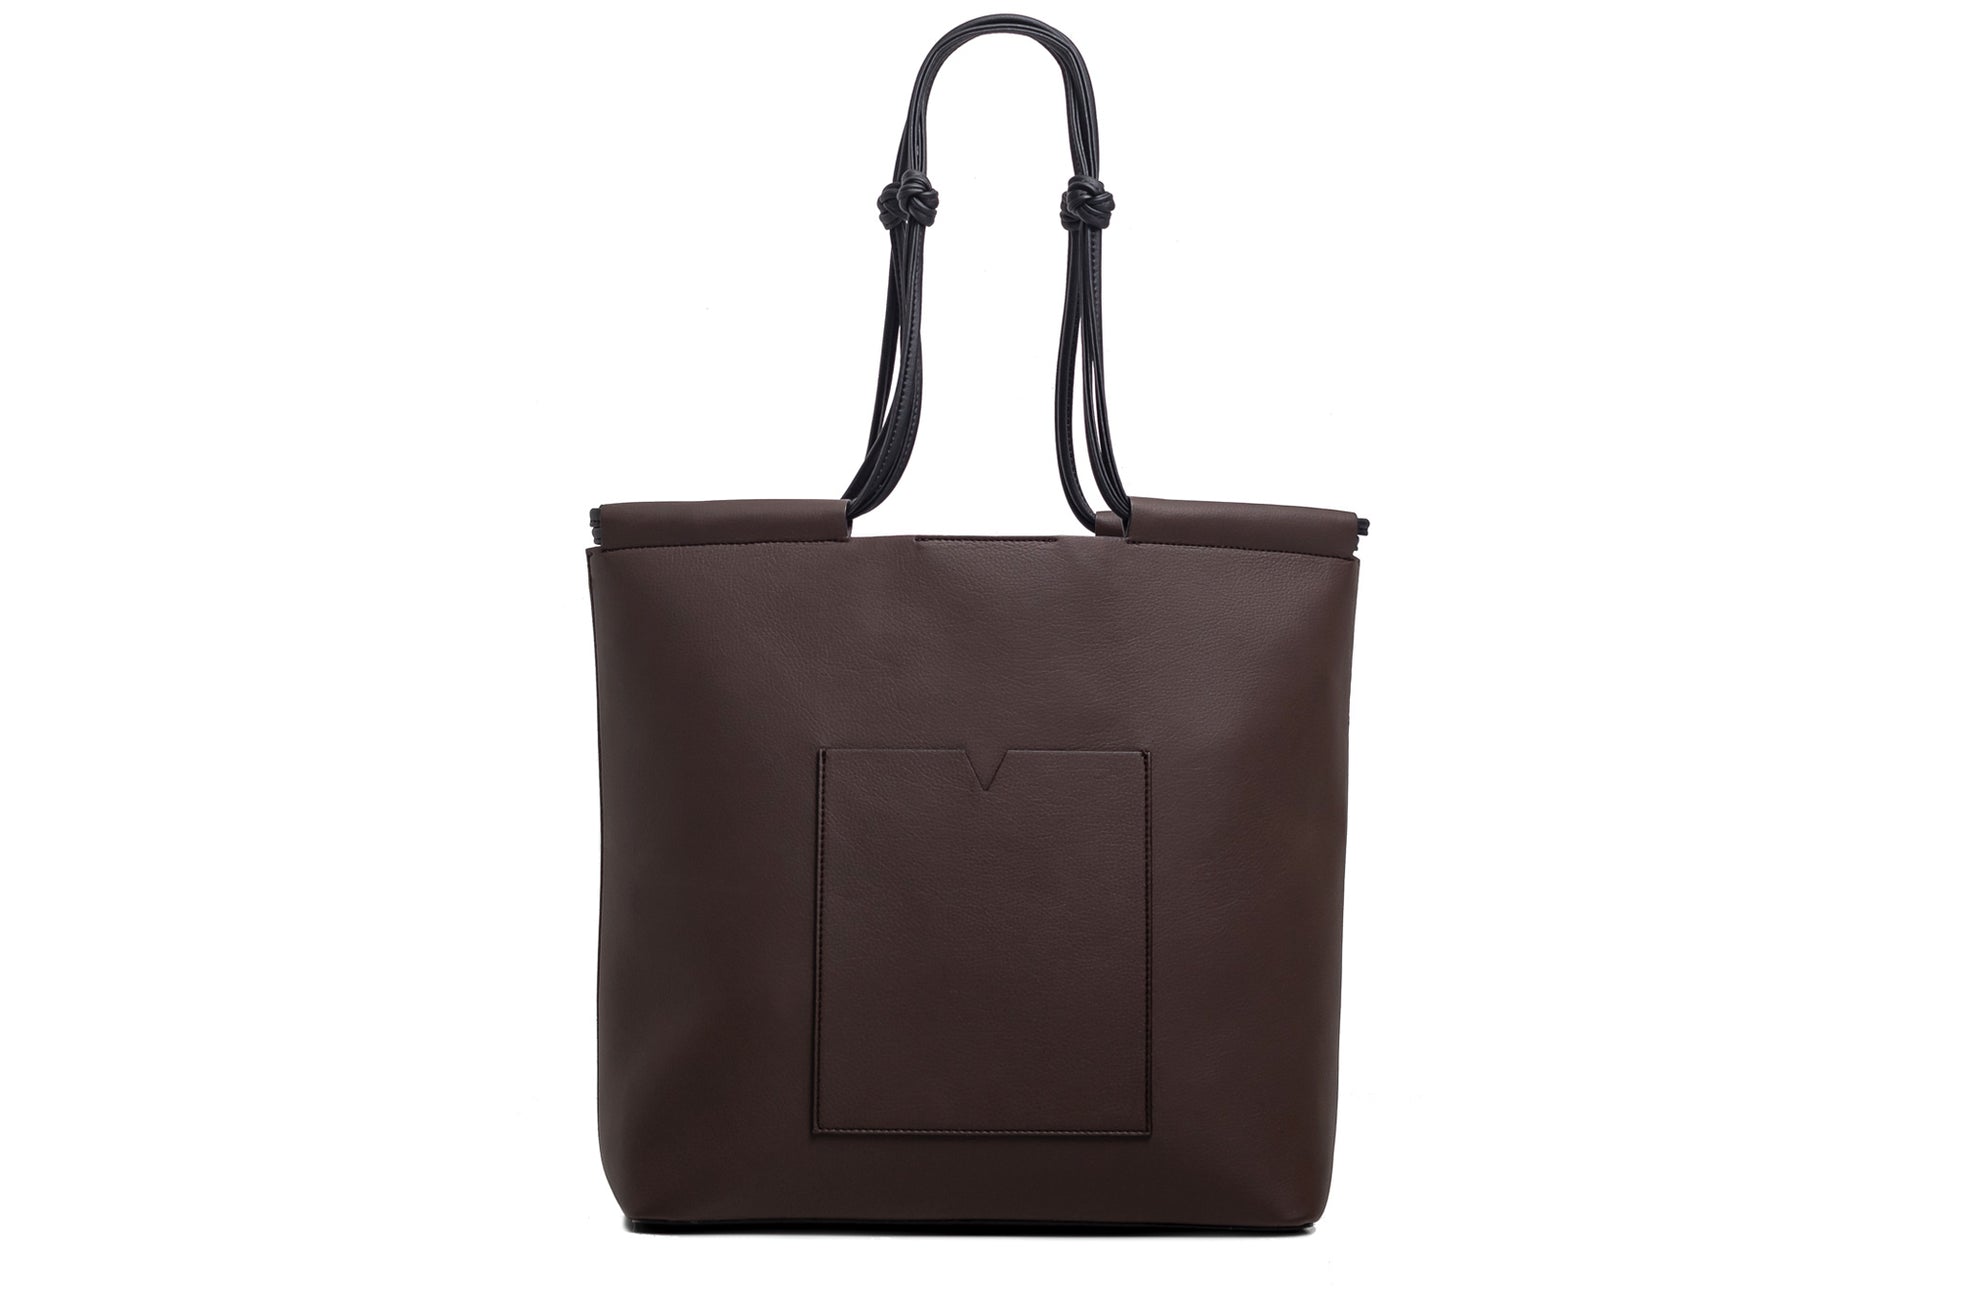 The Market Tote in Technik in Taupe and Black image 1